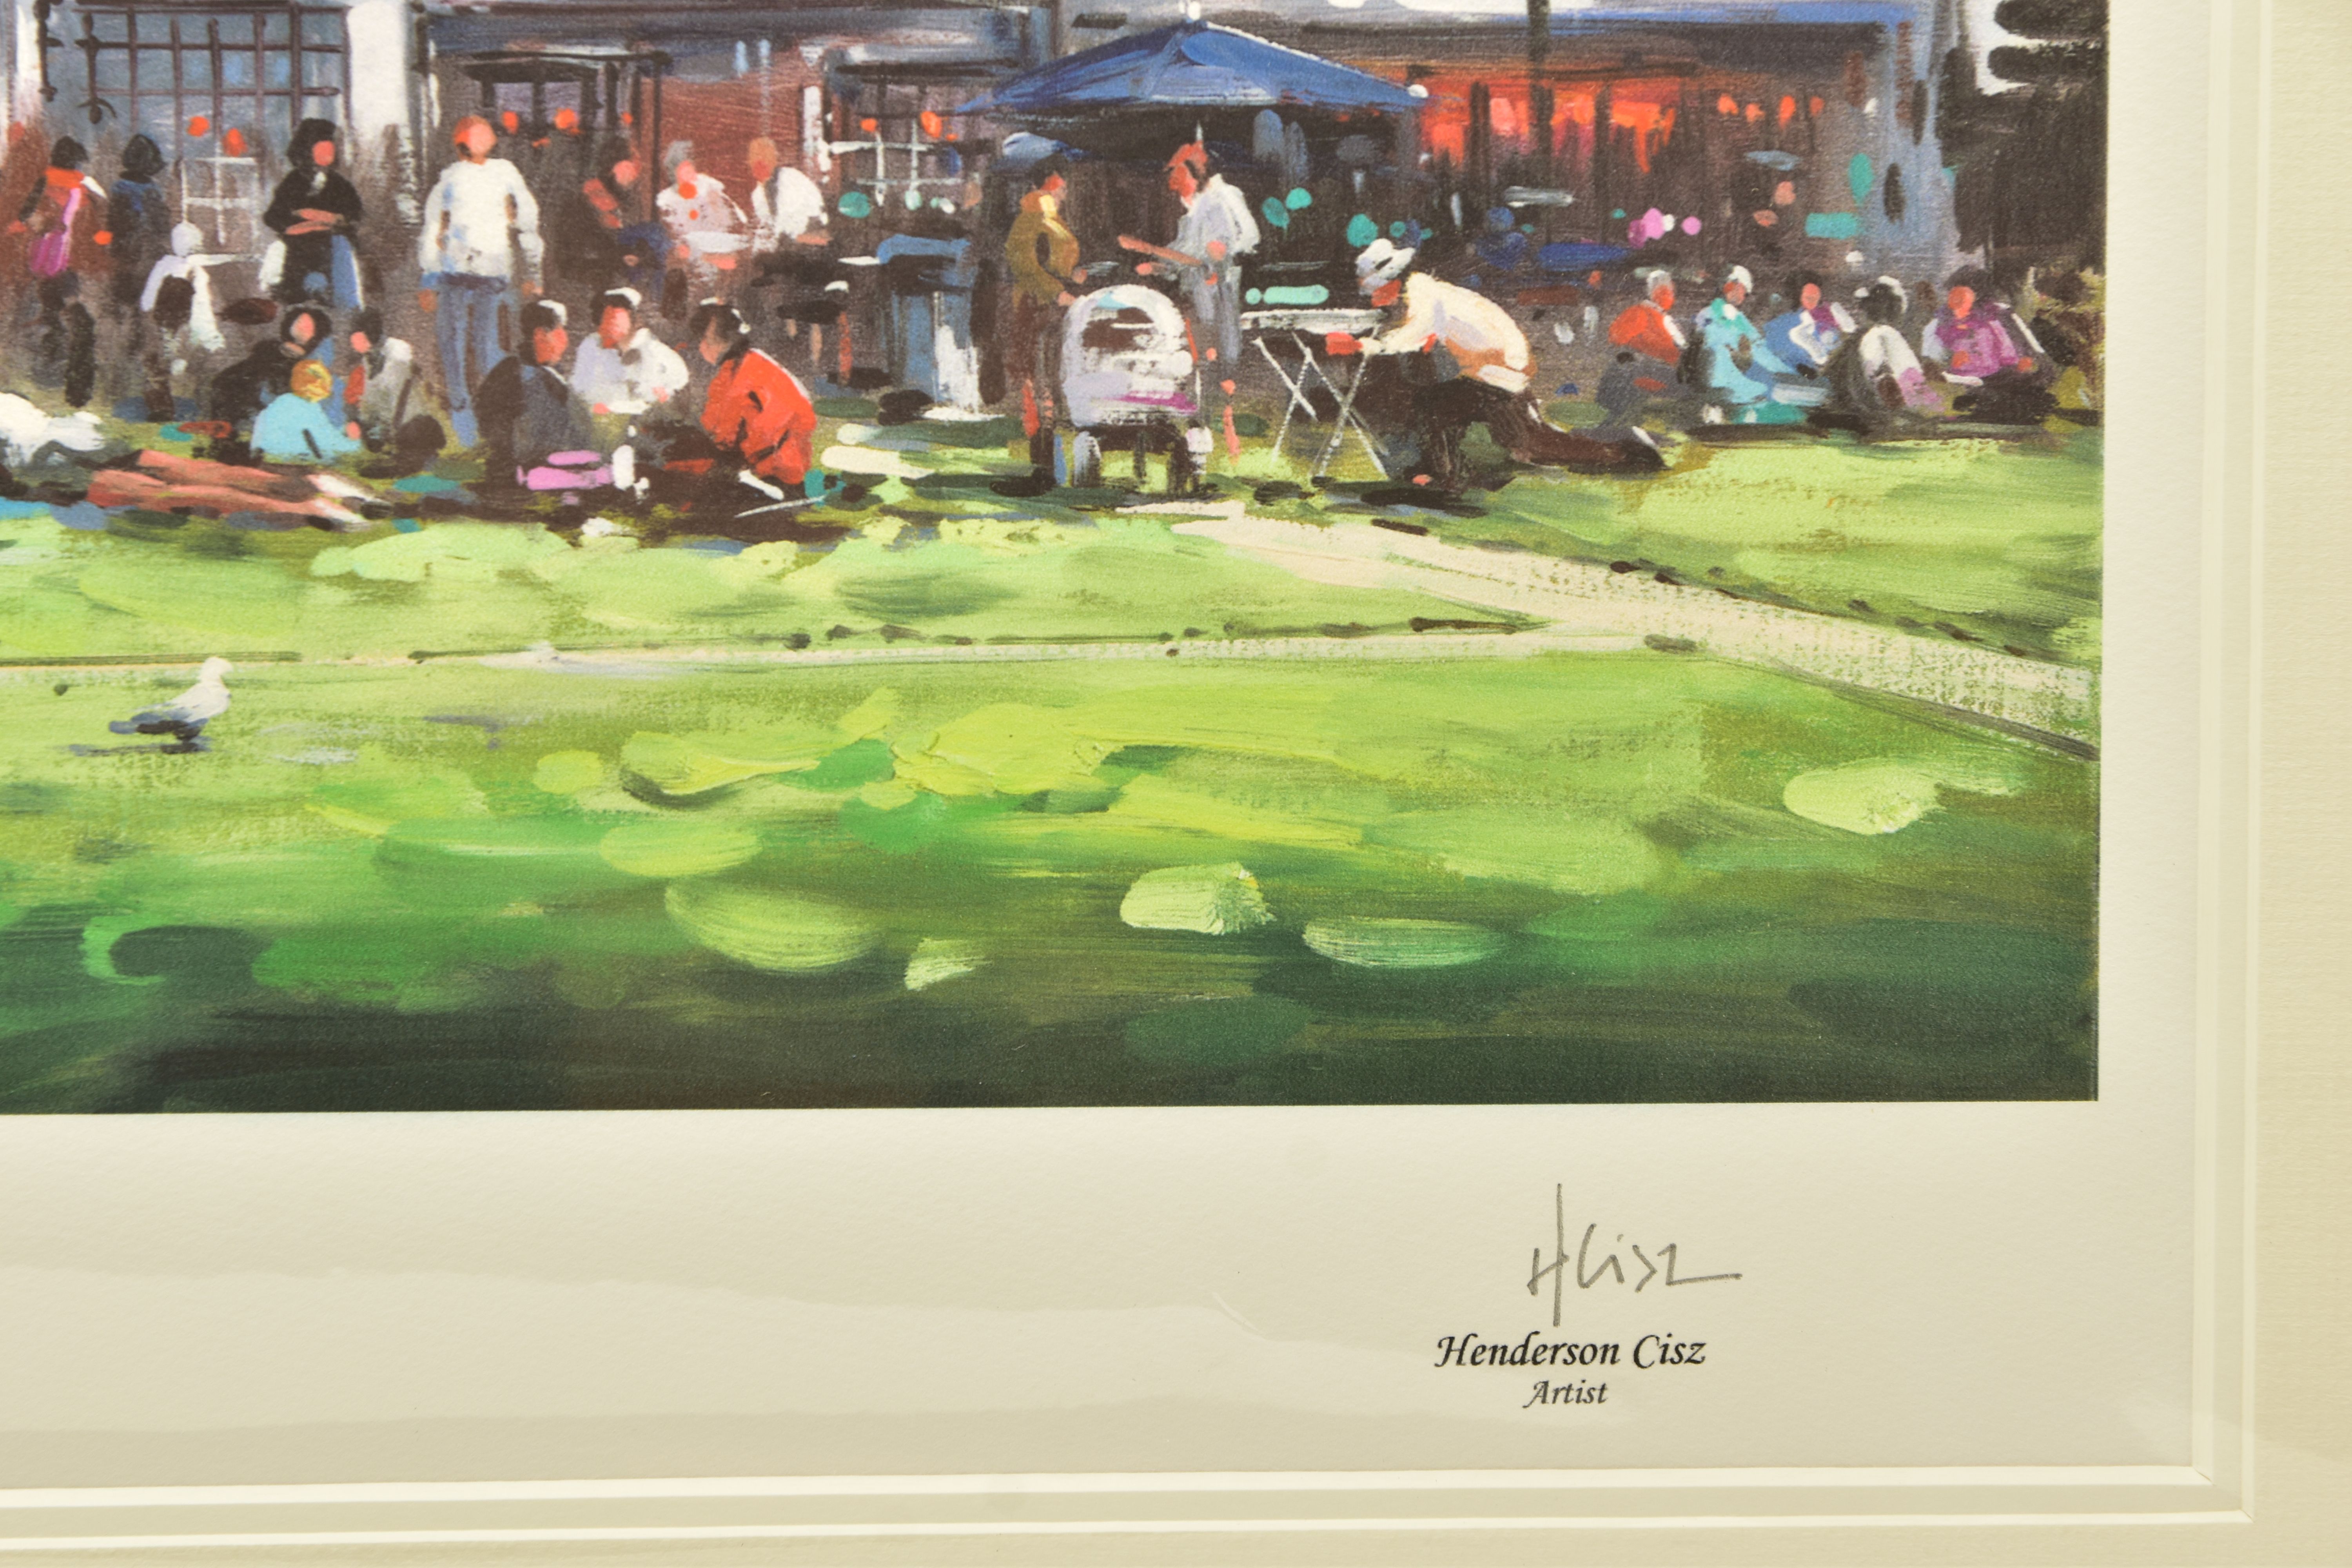 HENDERSON CISZ (BRAZIL 1960) 'LUNCH ON THE GREEN', a signed limited edition print depicting Exeter - Image 3 of 4